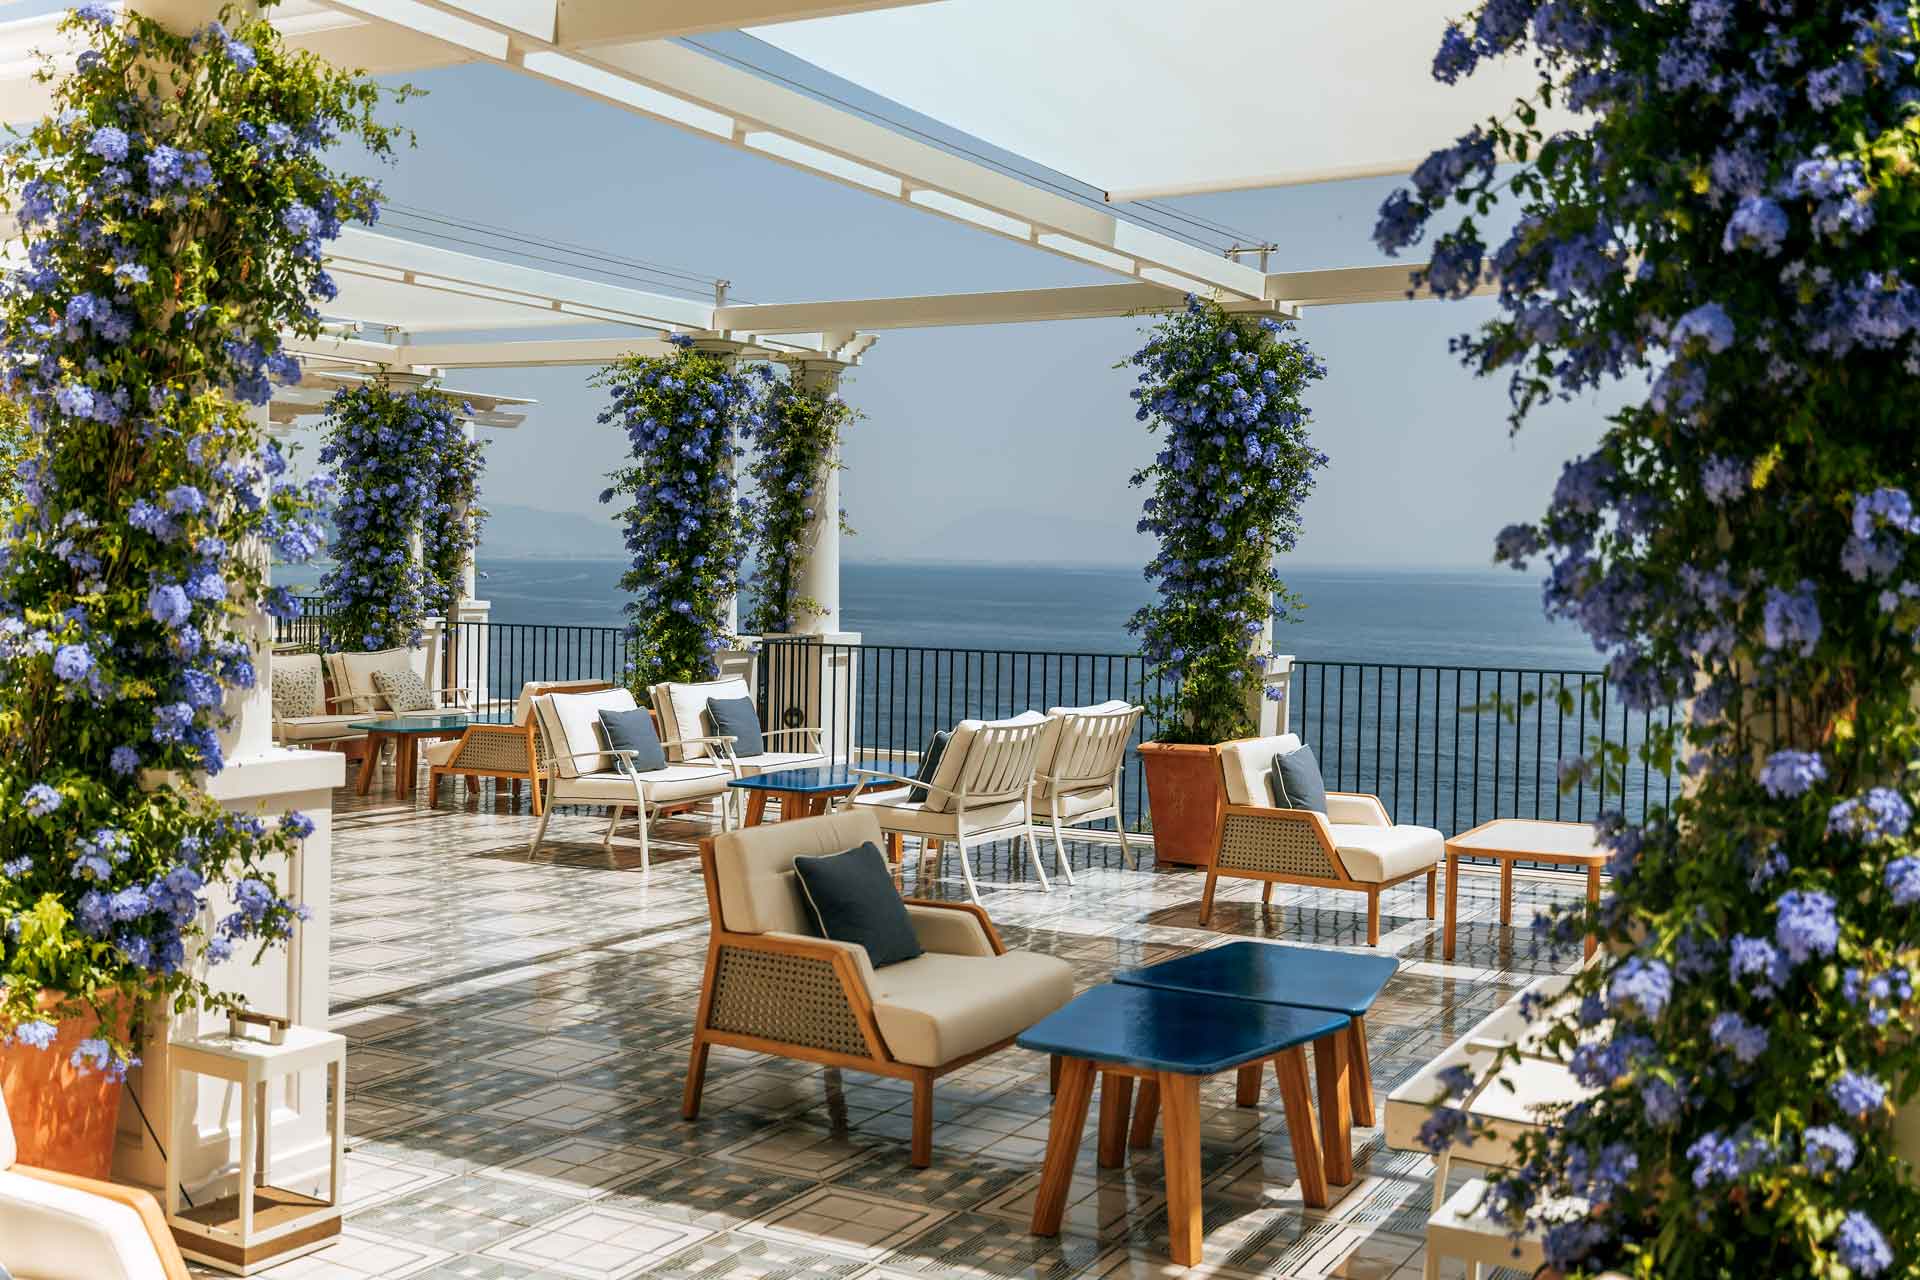 Outdoor dining area overlooking the sea